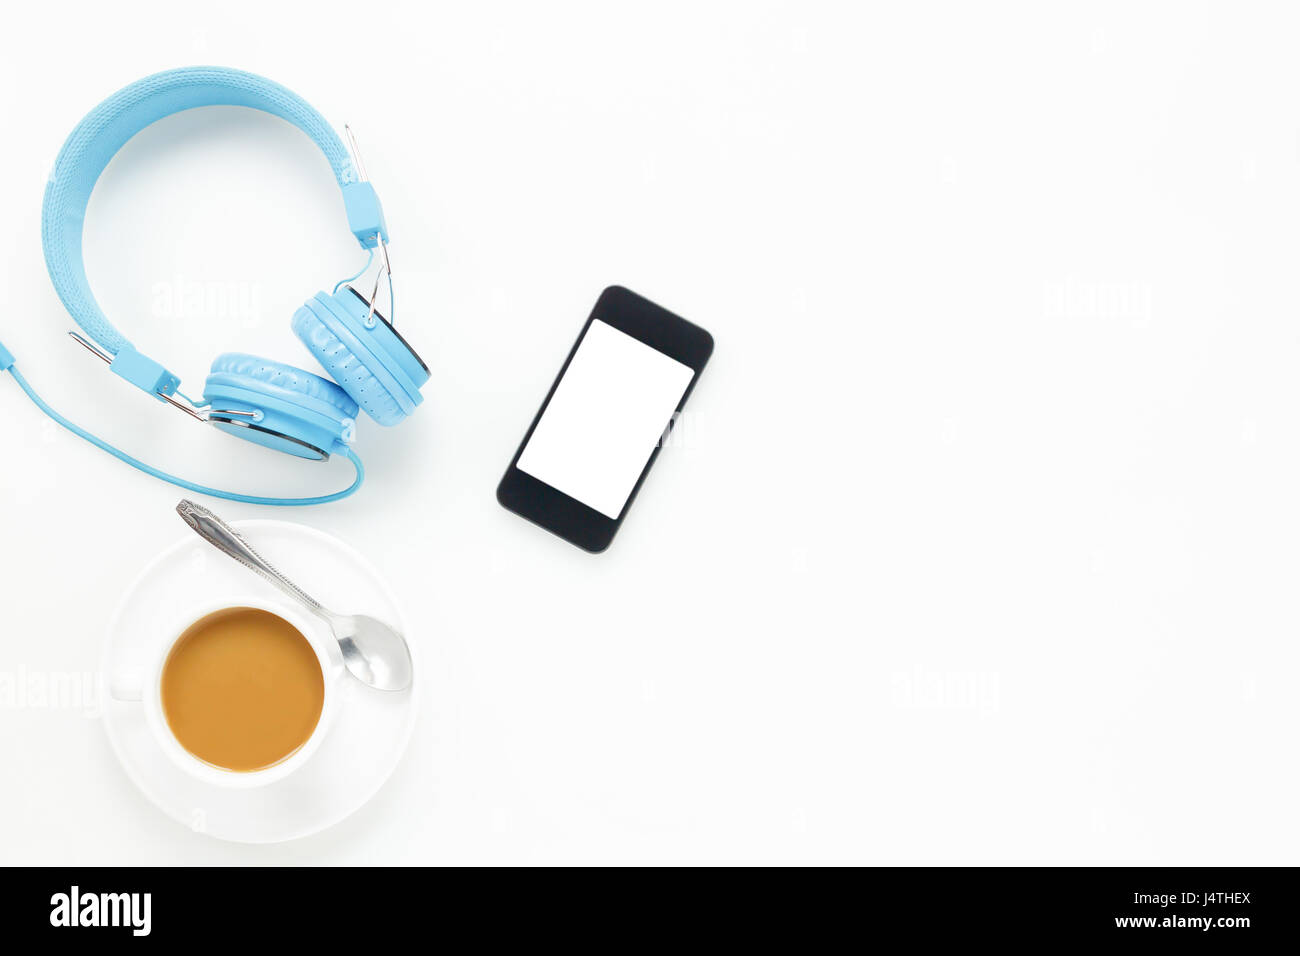 Top view  accessories office desk.smartphones headphones and cup of coffee on white background with copy space. Stock Photo